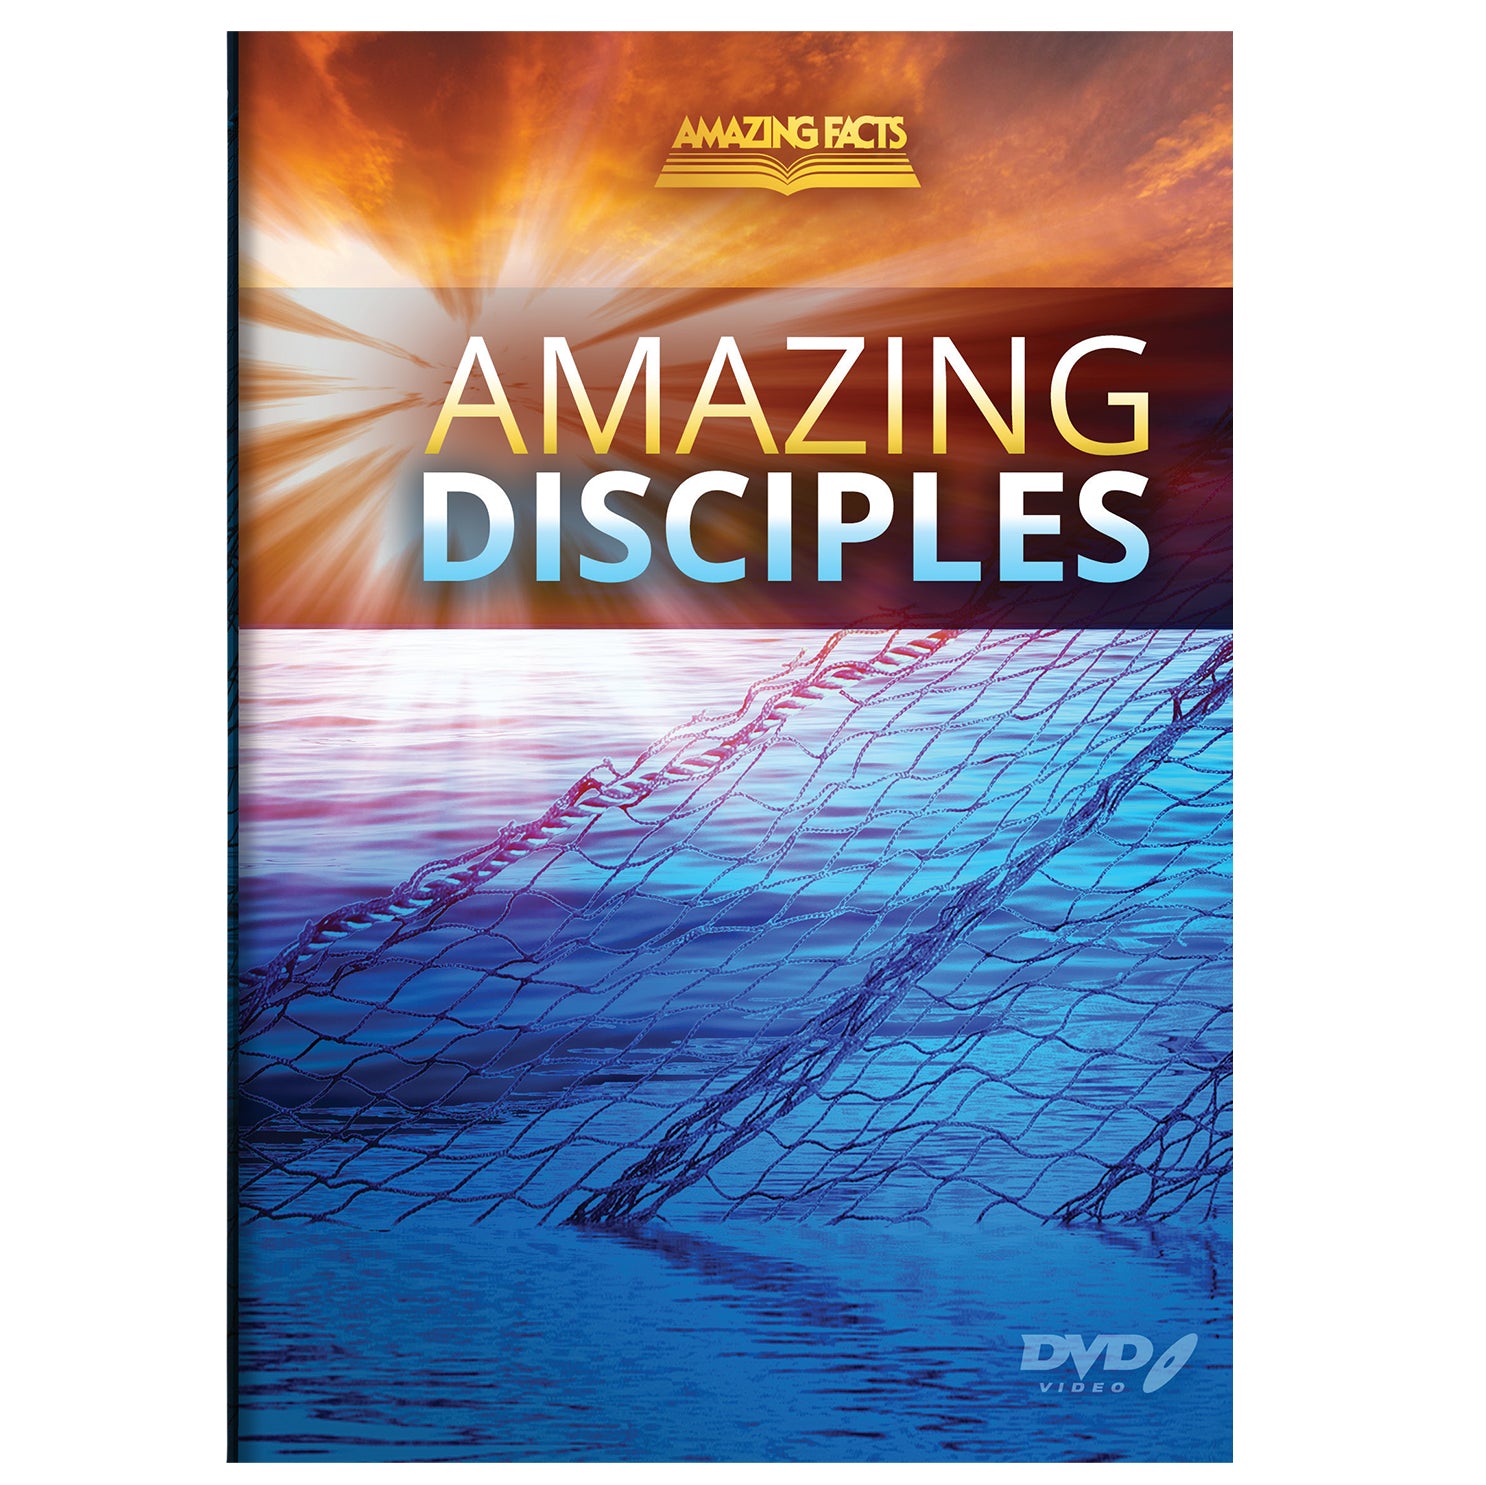 Amazing Disciples DVD set by Amazing Facts